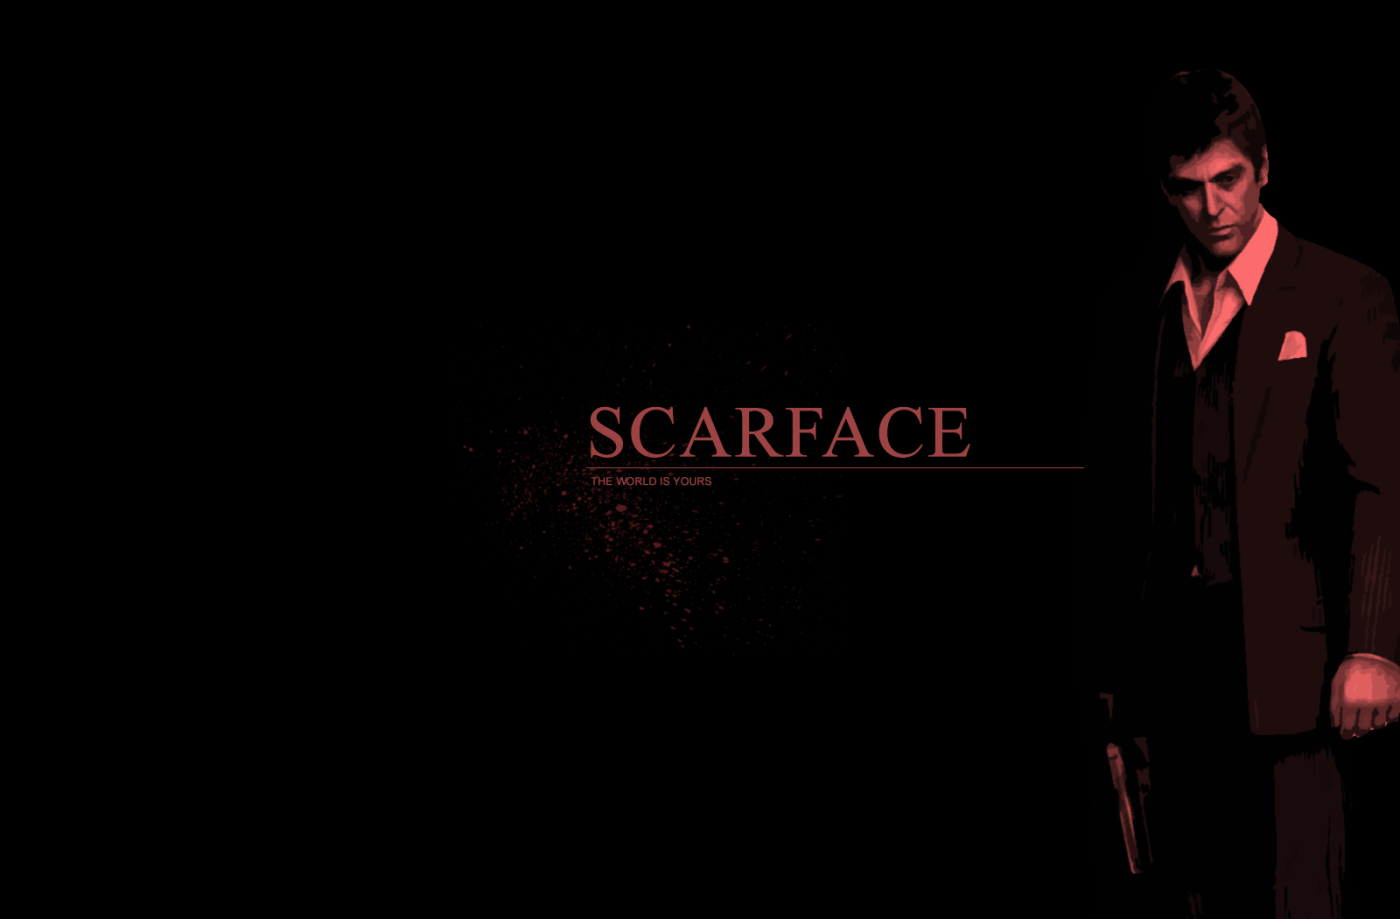 Scarface Movie Wallpaper HD Free Download Scarface Wallpaper